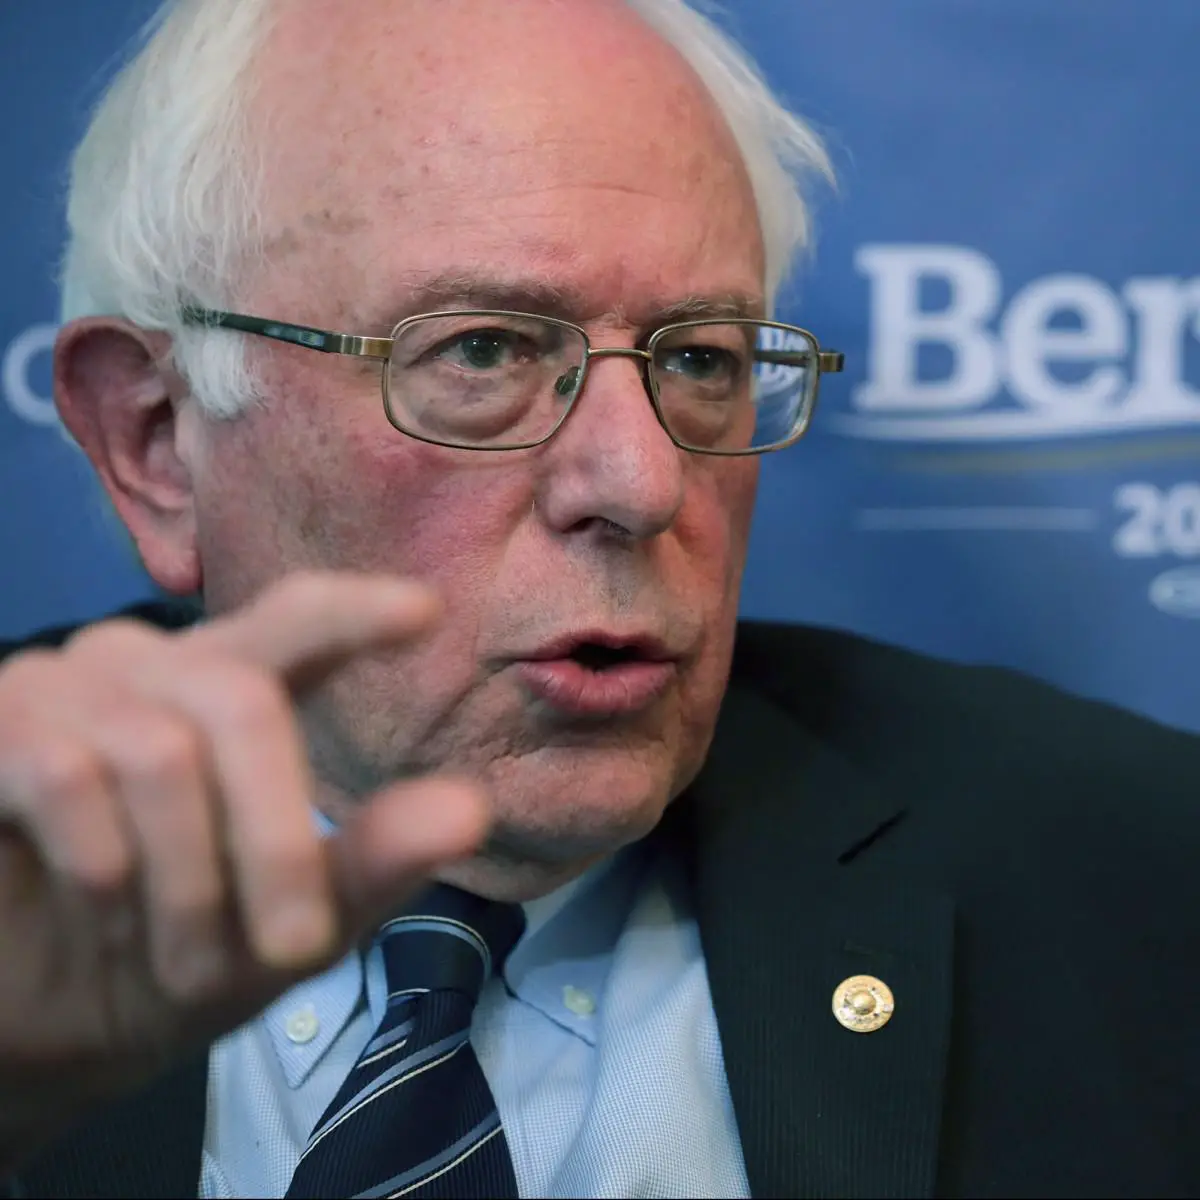 Bernie Sanders Gained More Twitter Followers Than Any Republican ...